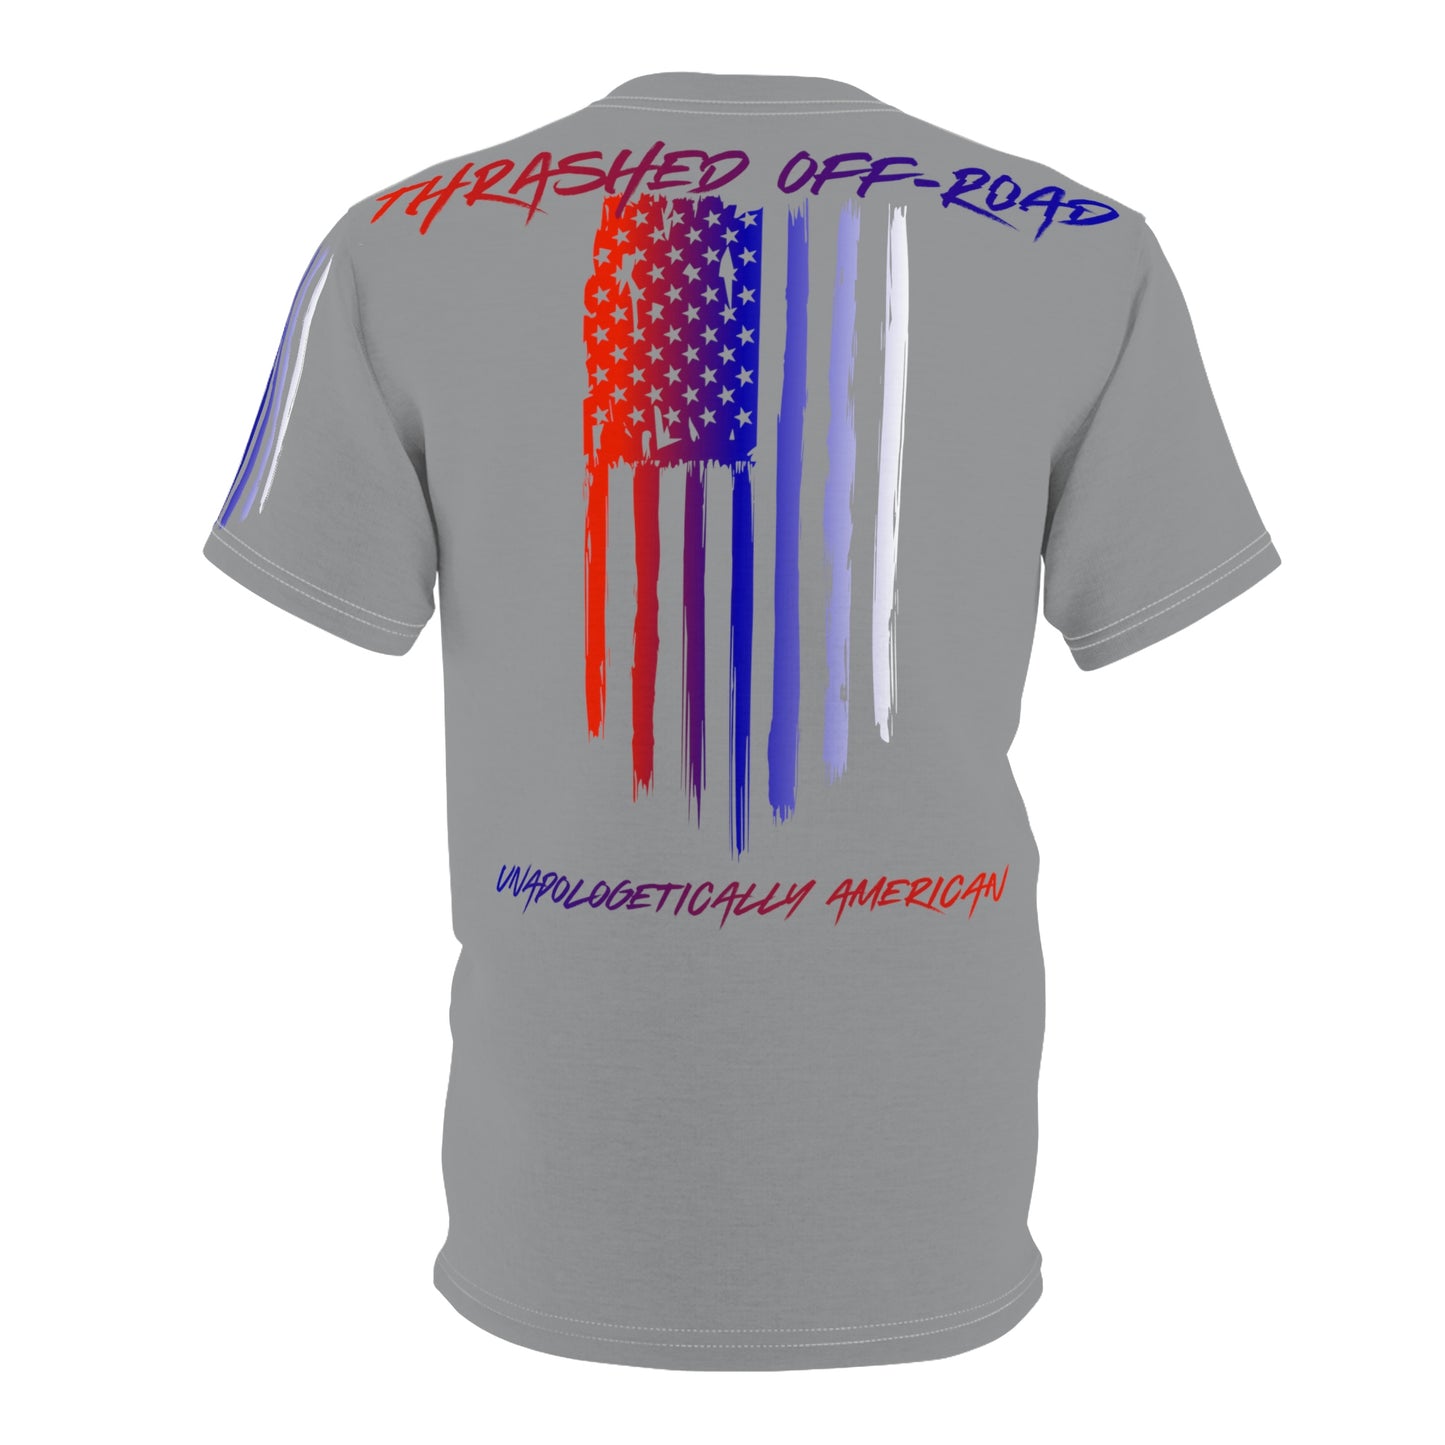 Thrashed Off Road Unapologetically American With Logo & Sleeve Print